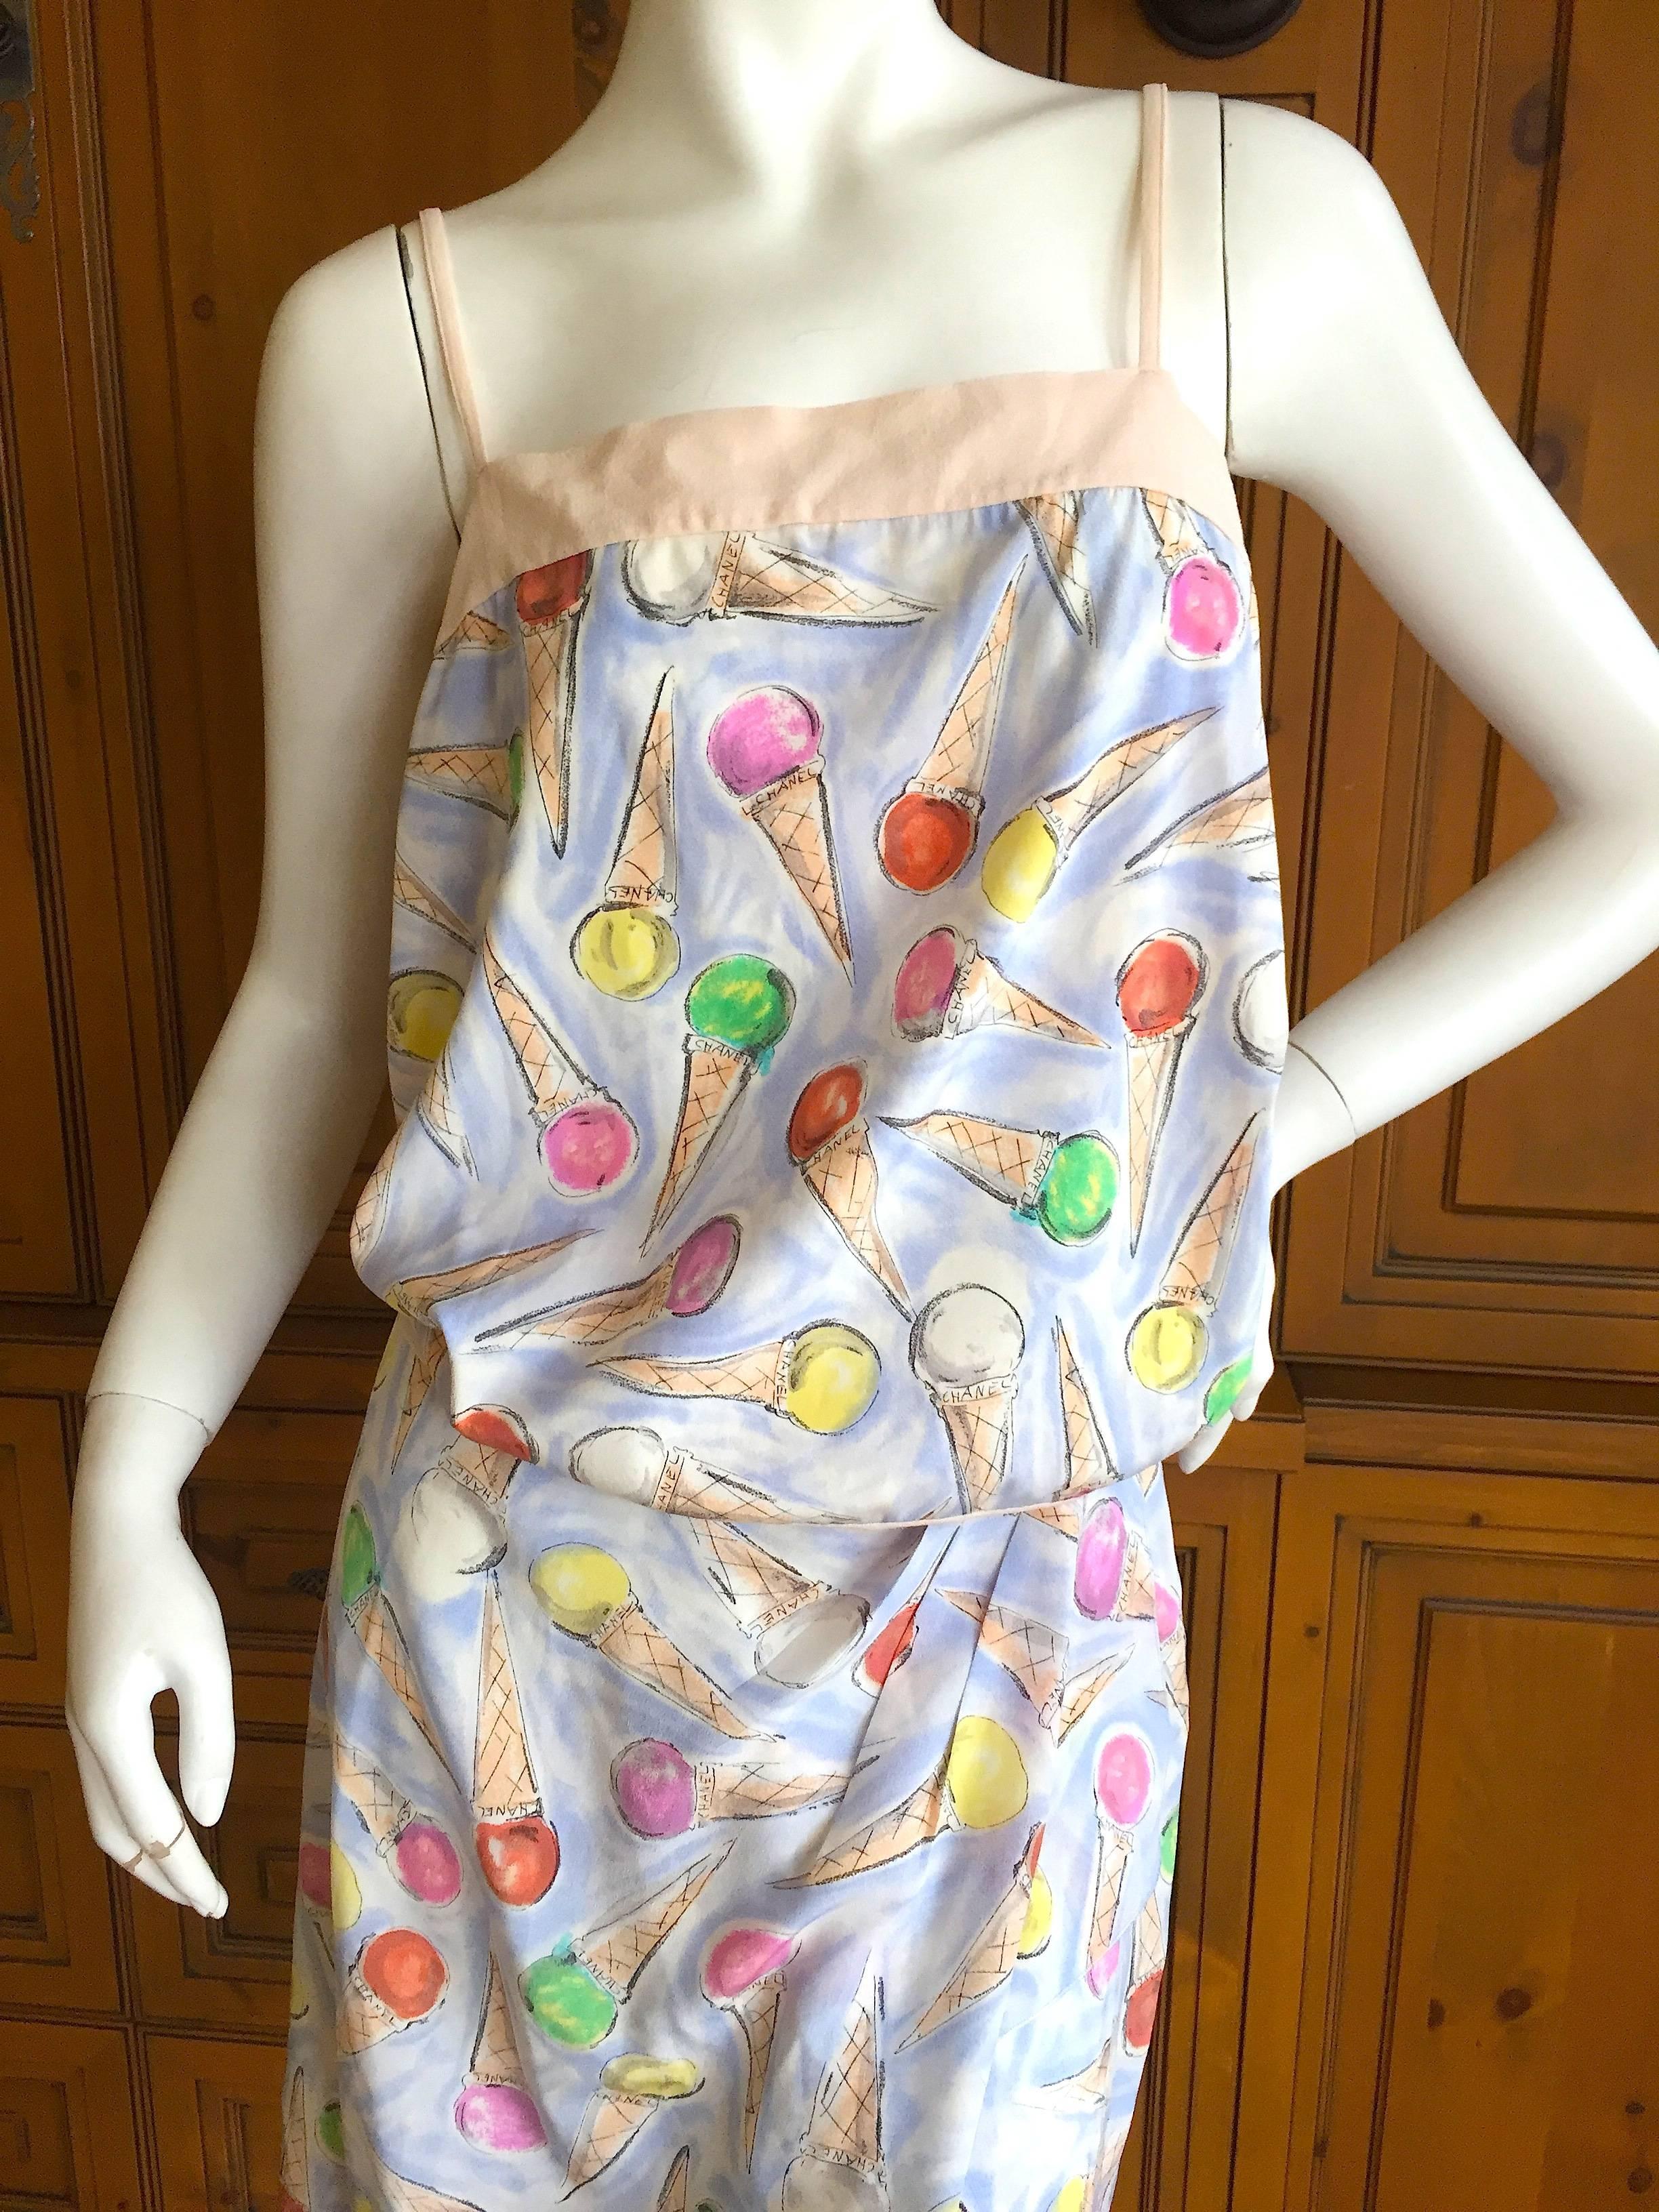 Lovely ice cream con print top and skirt by Karl Lagerfeld for Chanel.
The skirt has a high slit, and the top has a revealing keyhole back.
From Cruise 2004.
Size 38
Bust 36